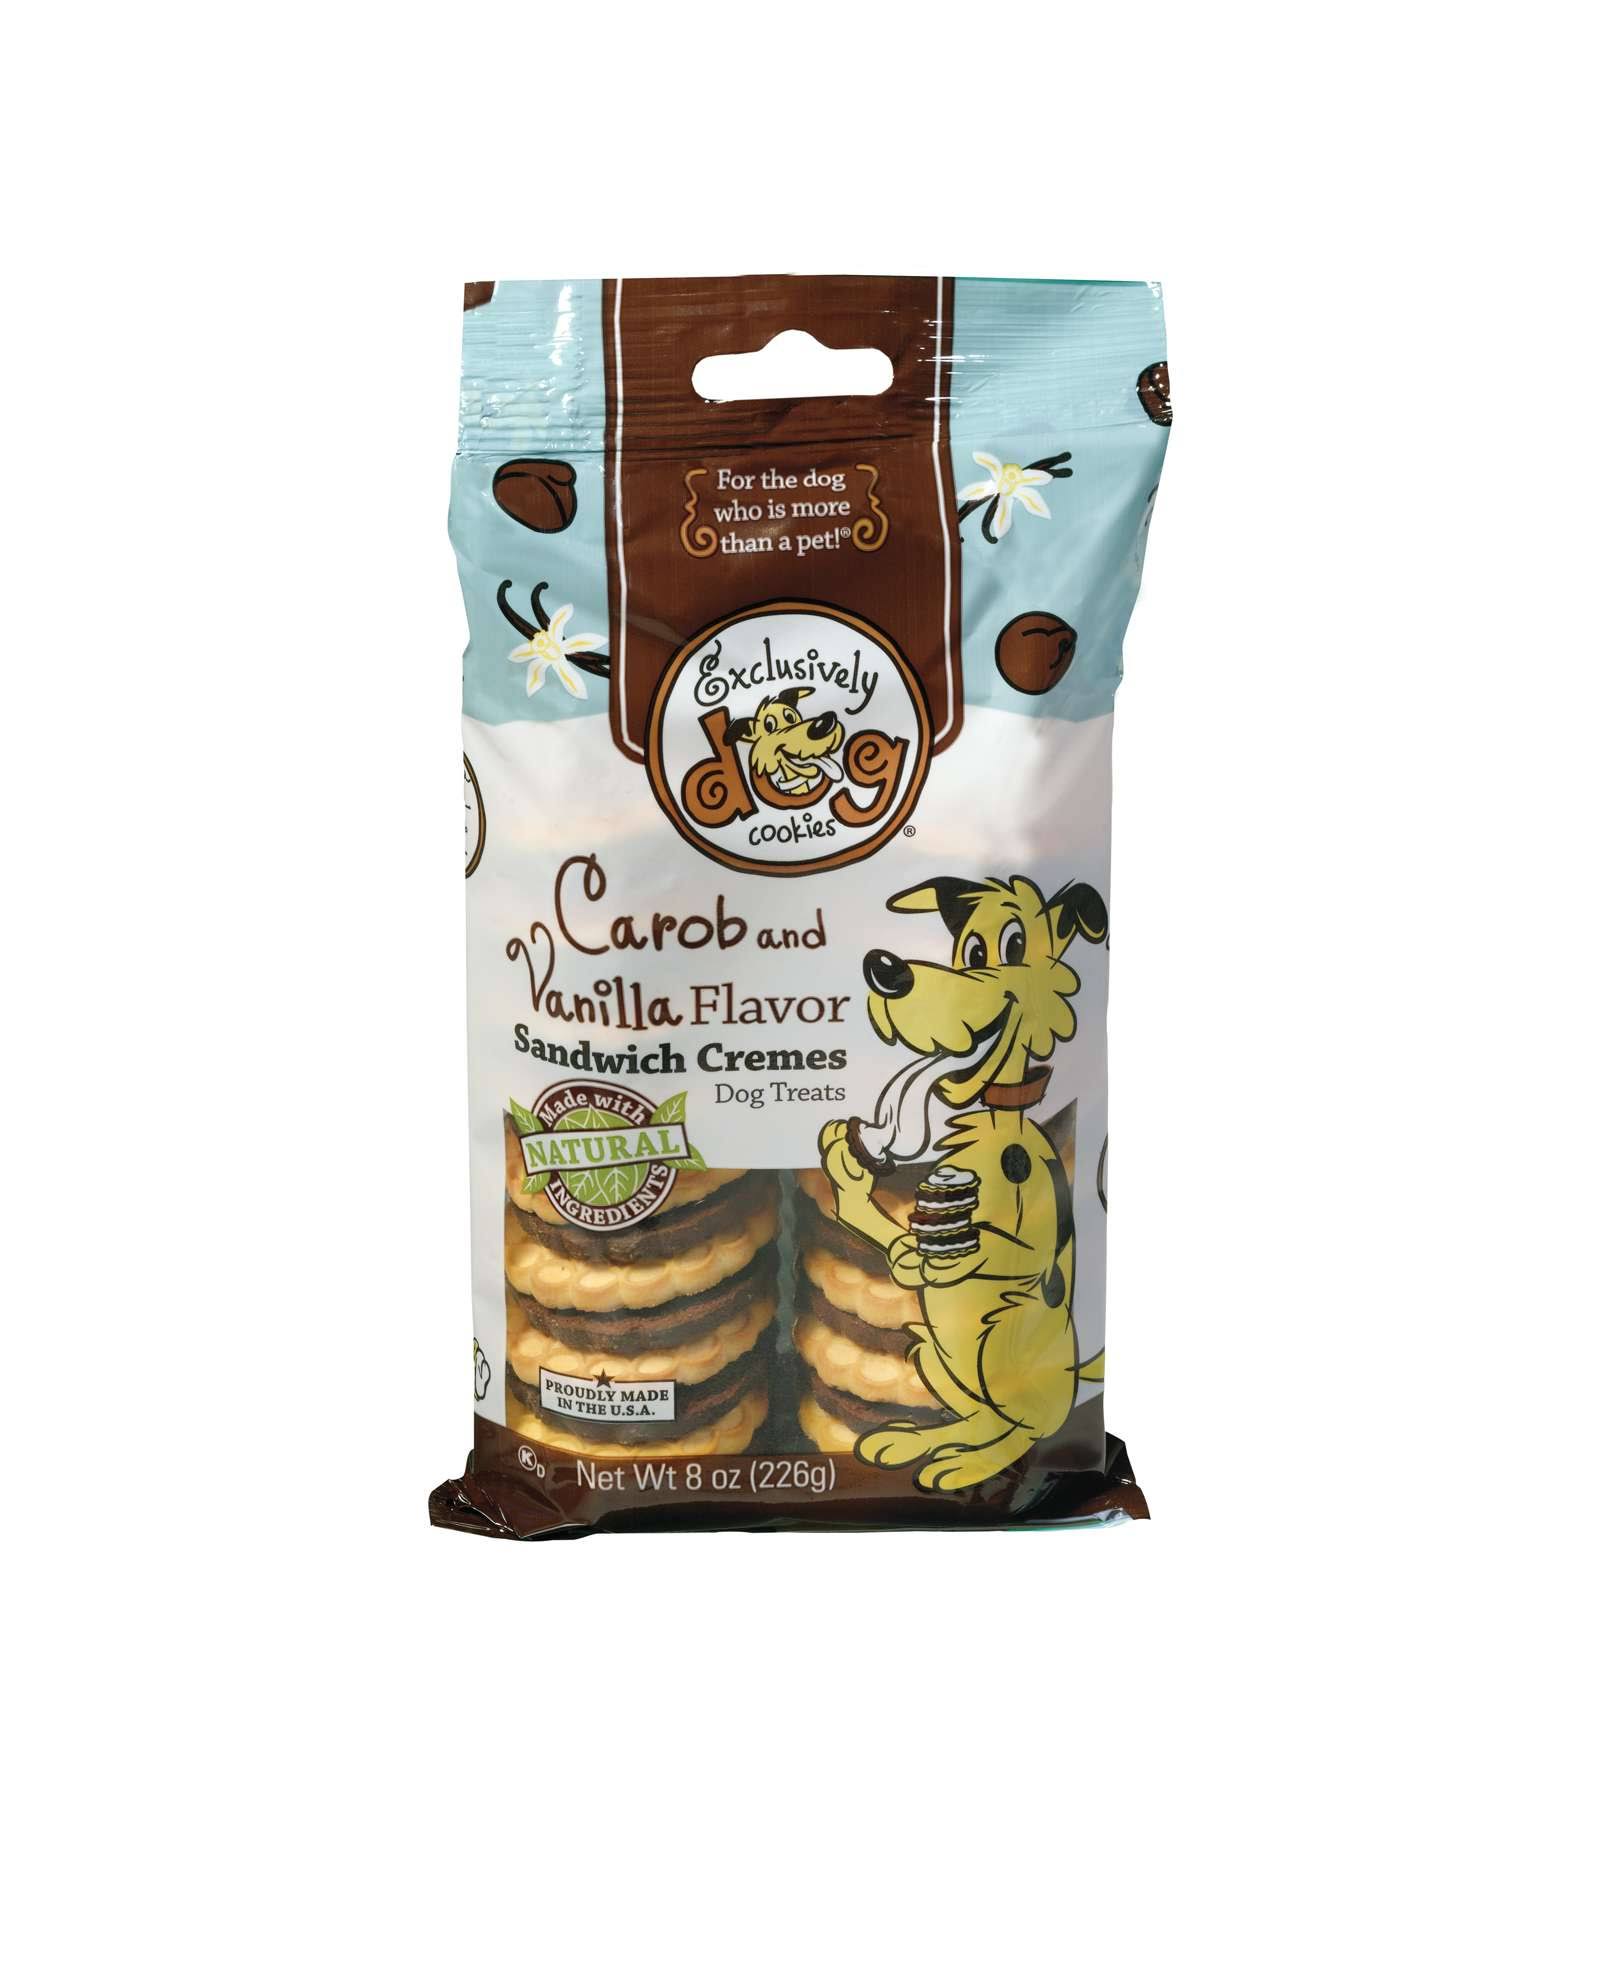 Exclusively Dog Cookies Sandwich - Carob and Vanilla Flavor, 8oz